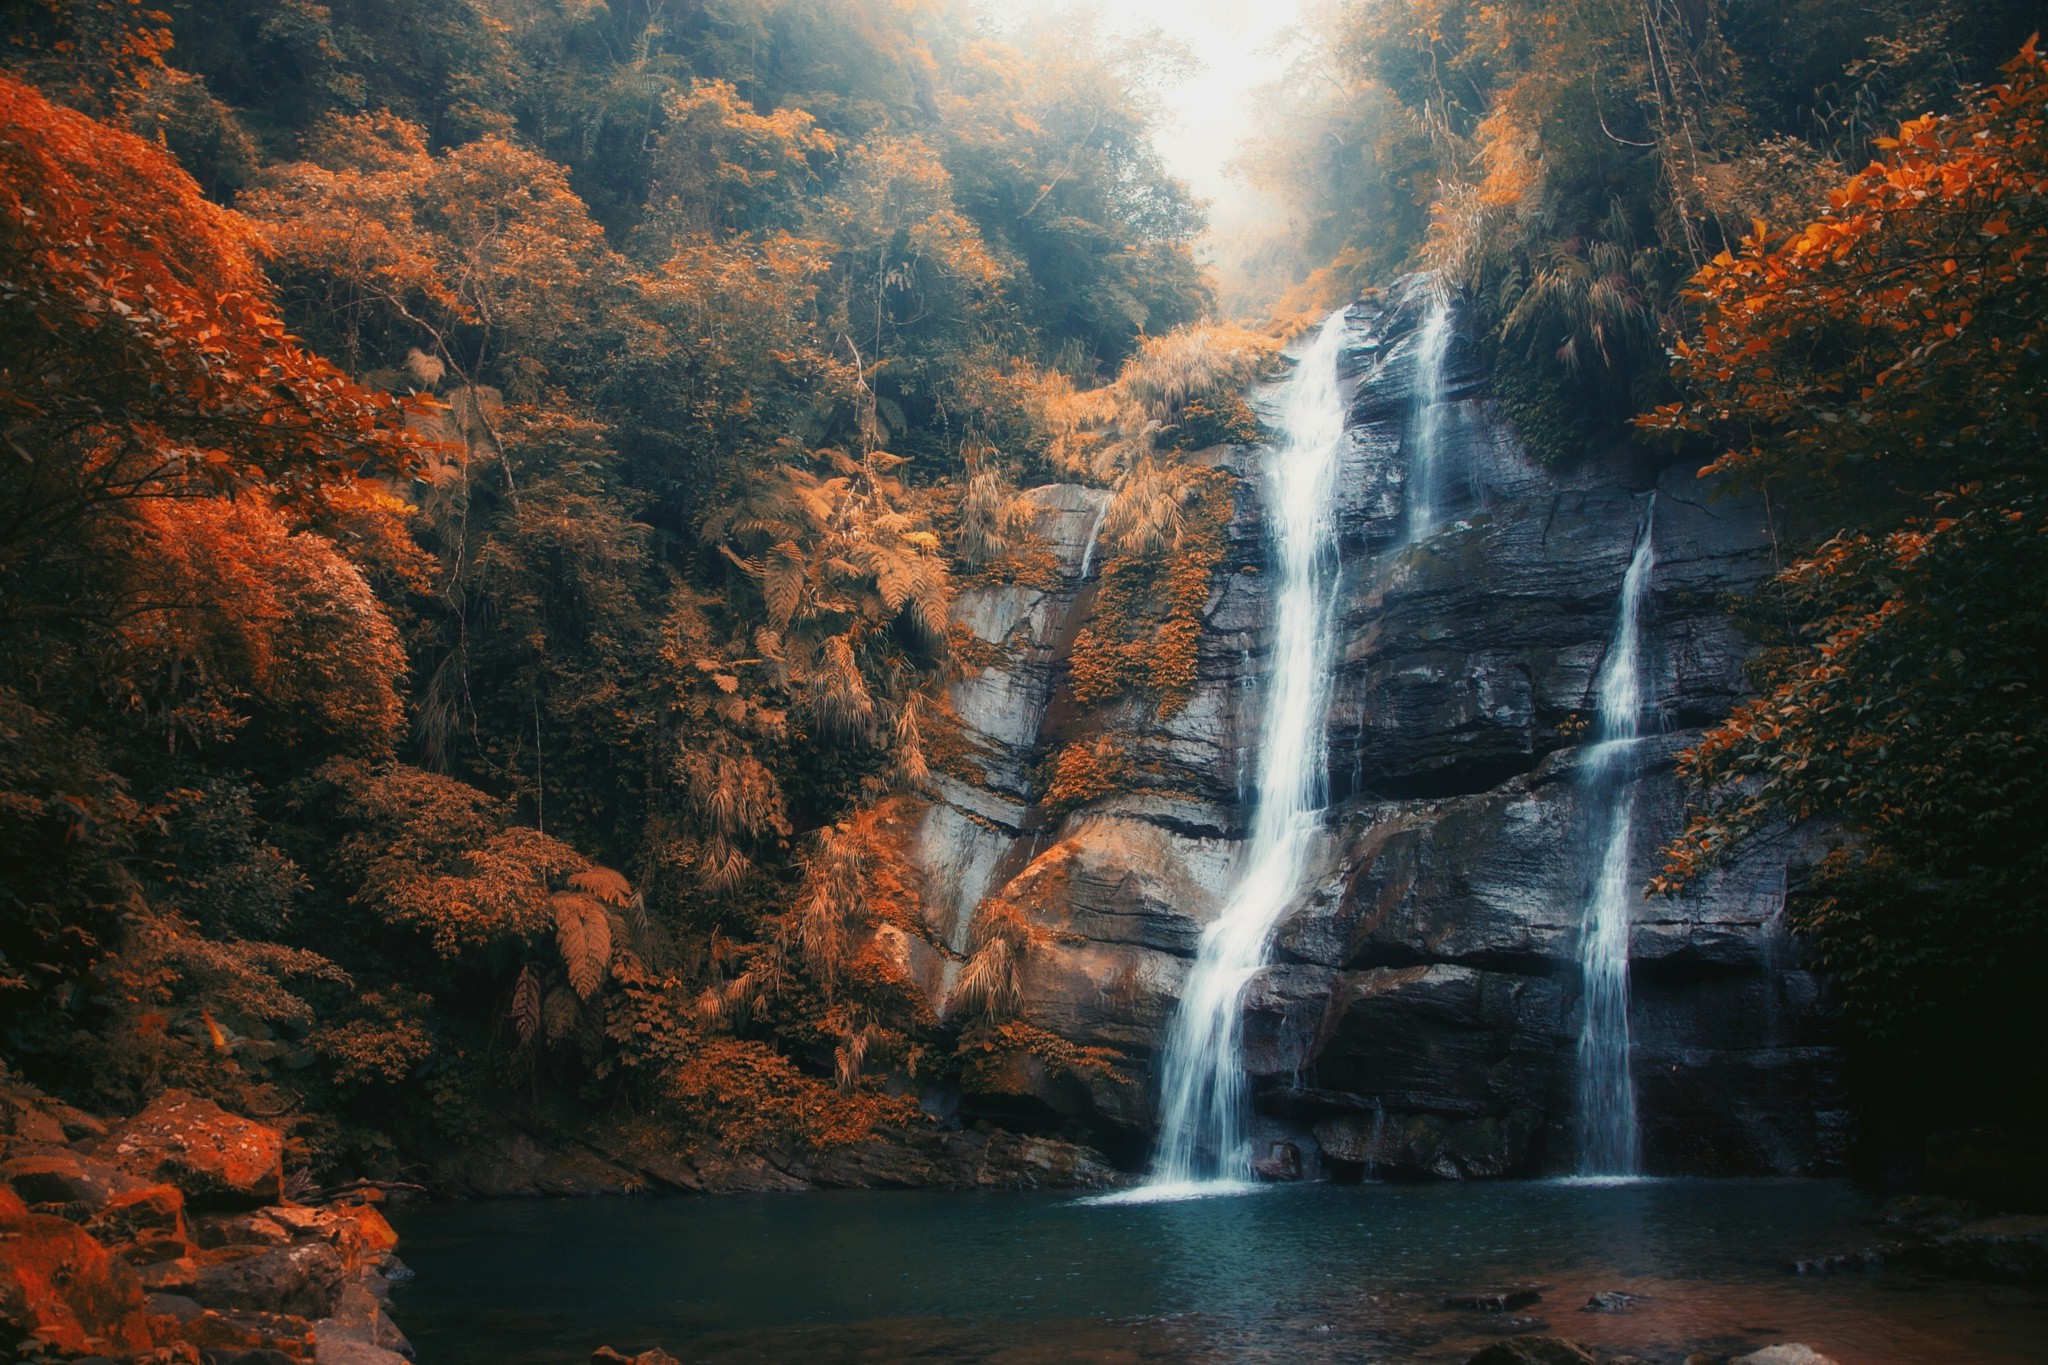 Wallpaper, landscape, forest, fall, leaves, waterfall, lake, rock, nature, sky, mist, river, orange, national park, pond, stream, daylight, tree, autumn, leaf, mountain, watercourse, chute, 2048x1365 px, computer wallpaper, body of water